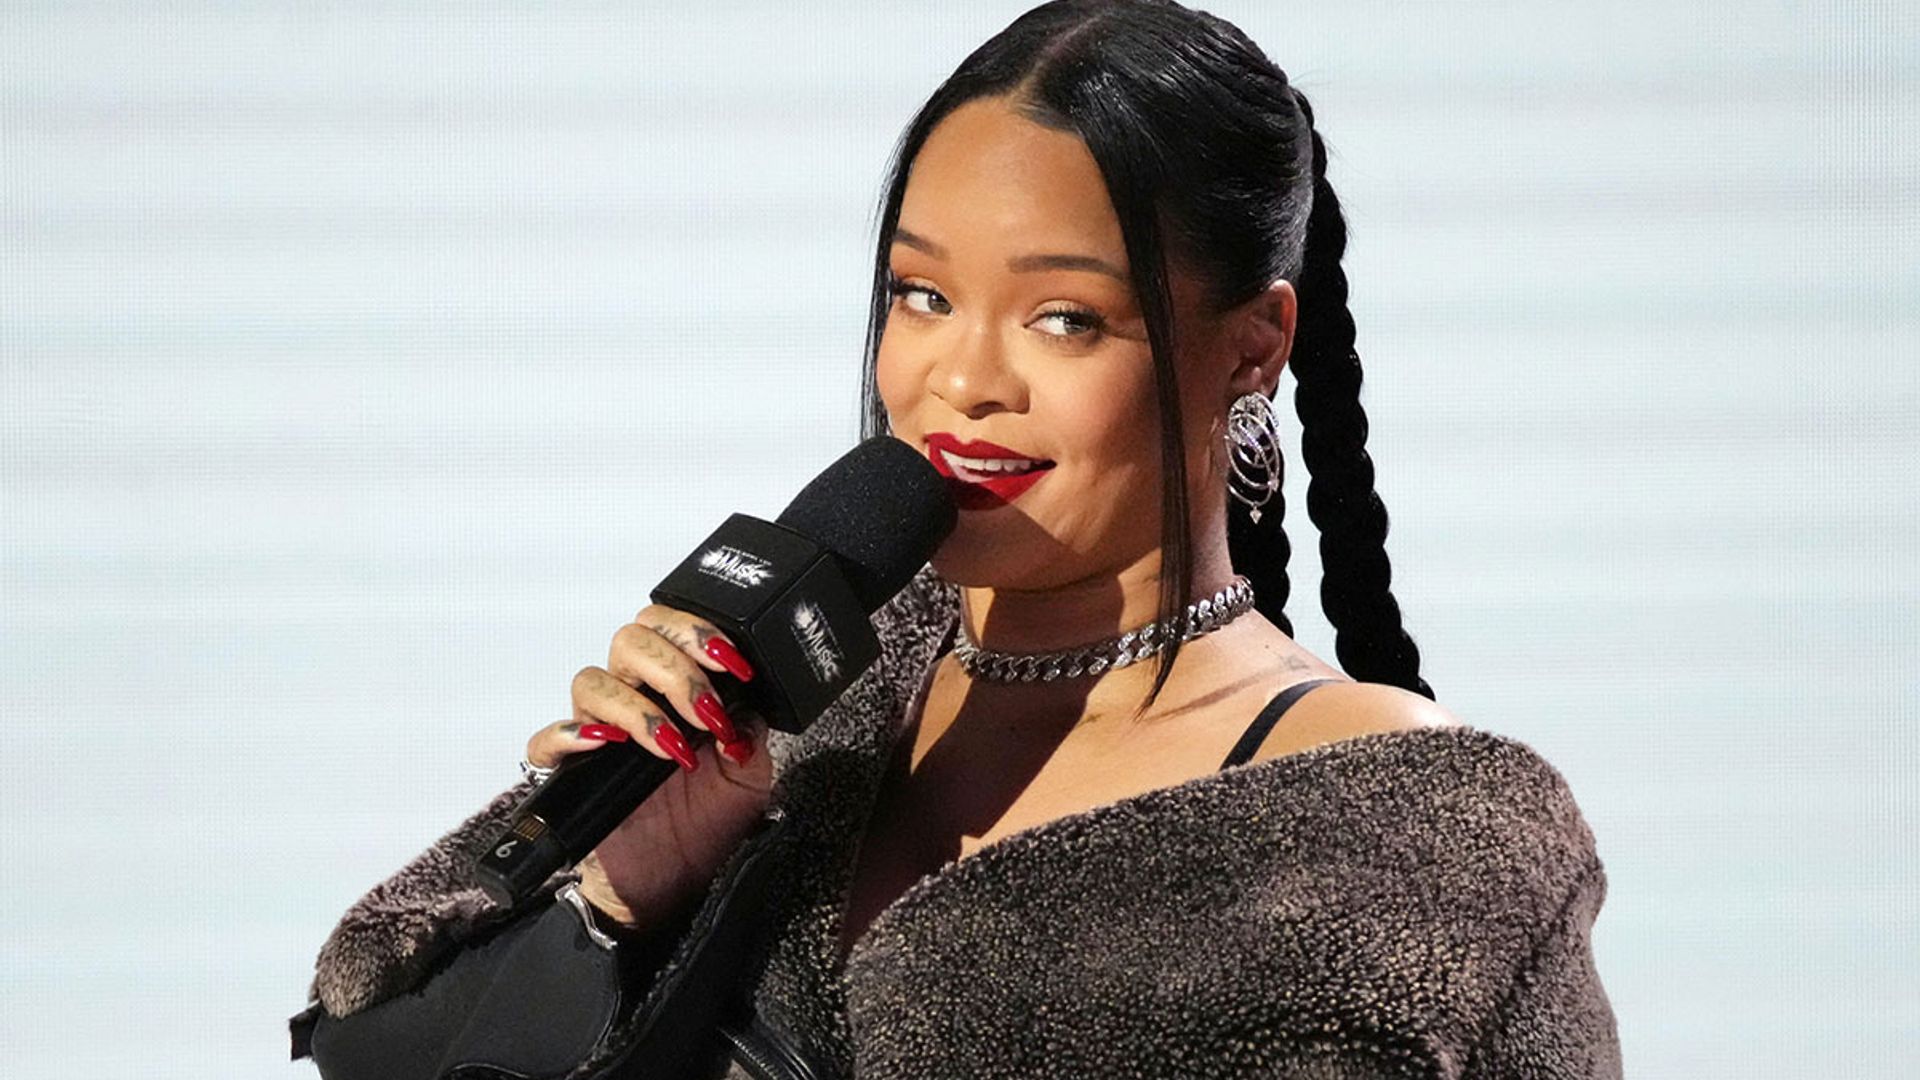 Rihanna's Super Bowl pregnancy announcement - all the hints you missed